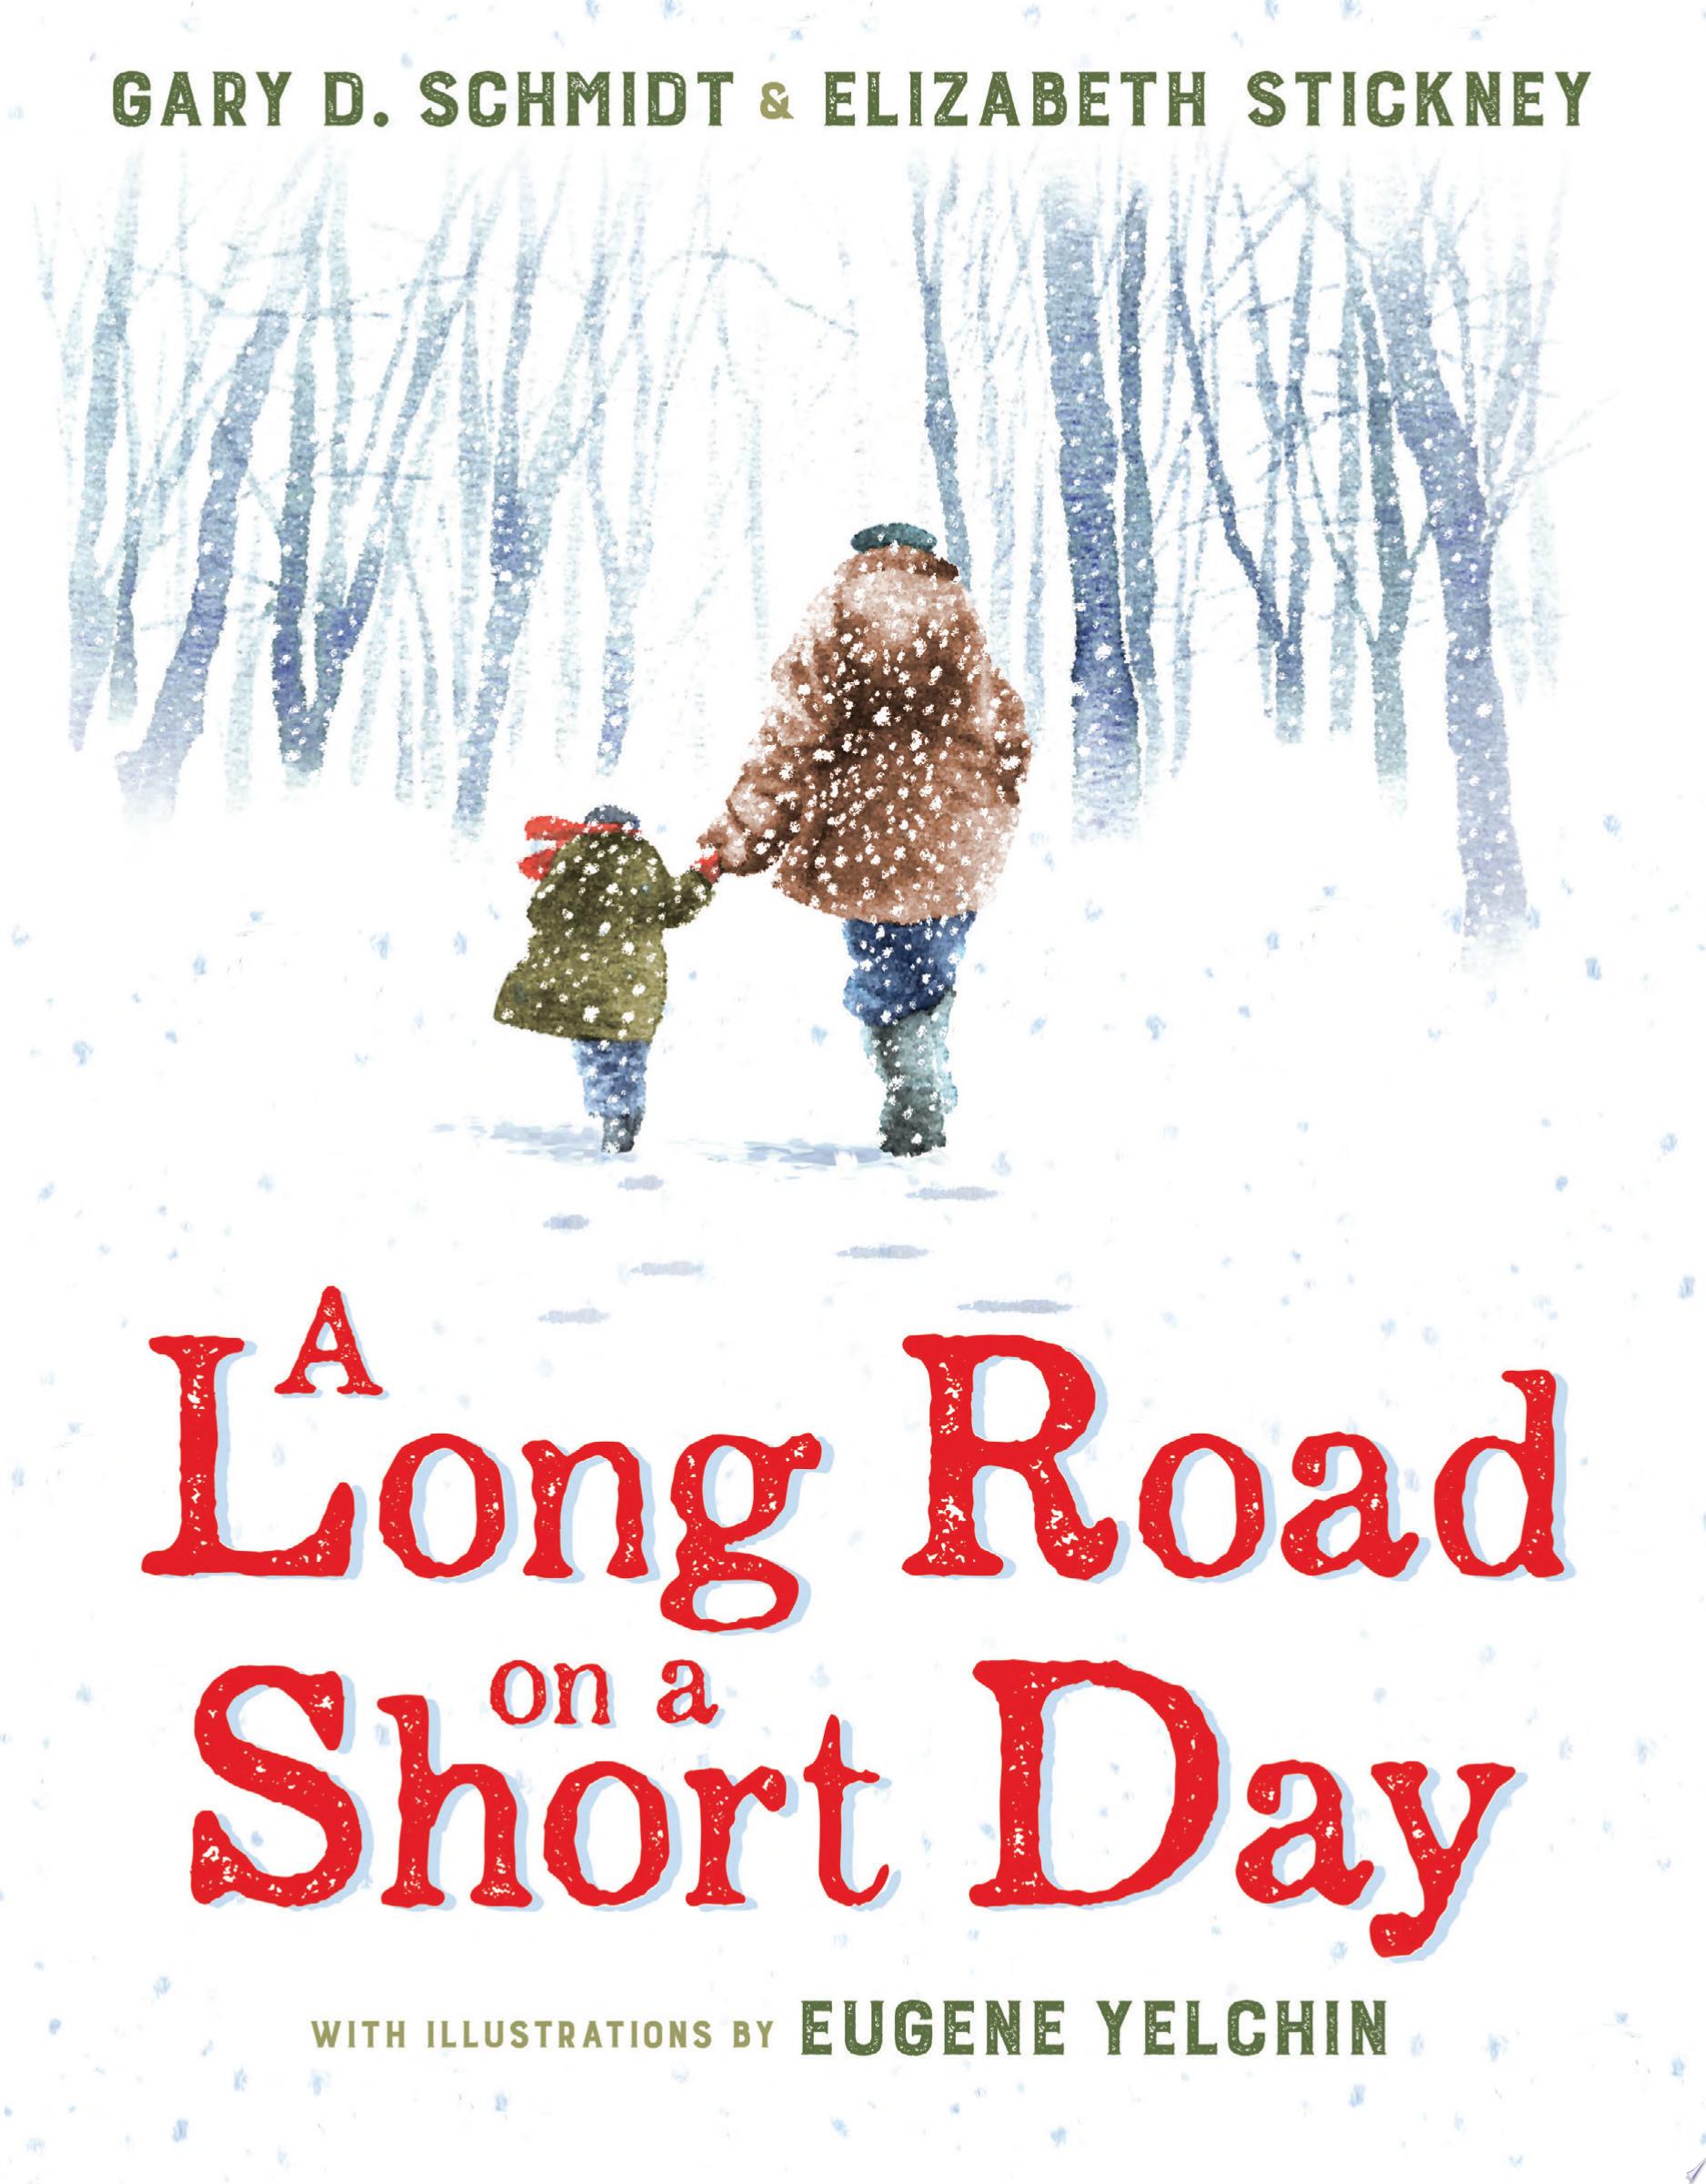 Image for "A Long Road on a Short Day"